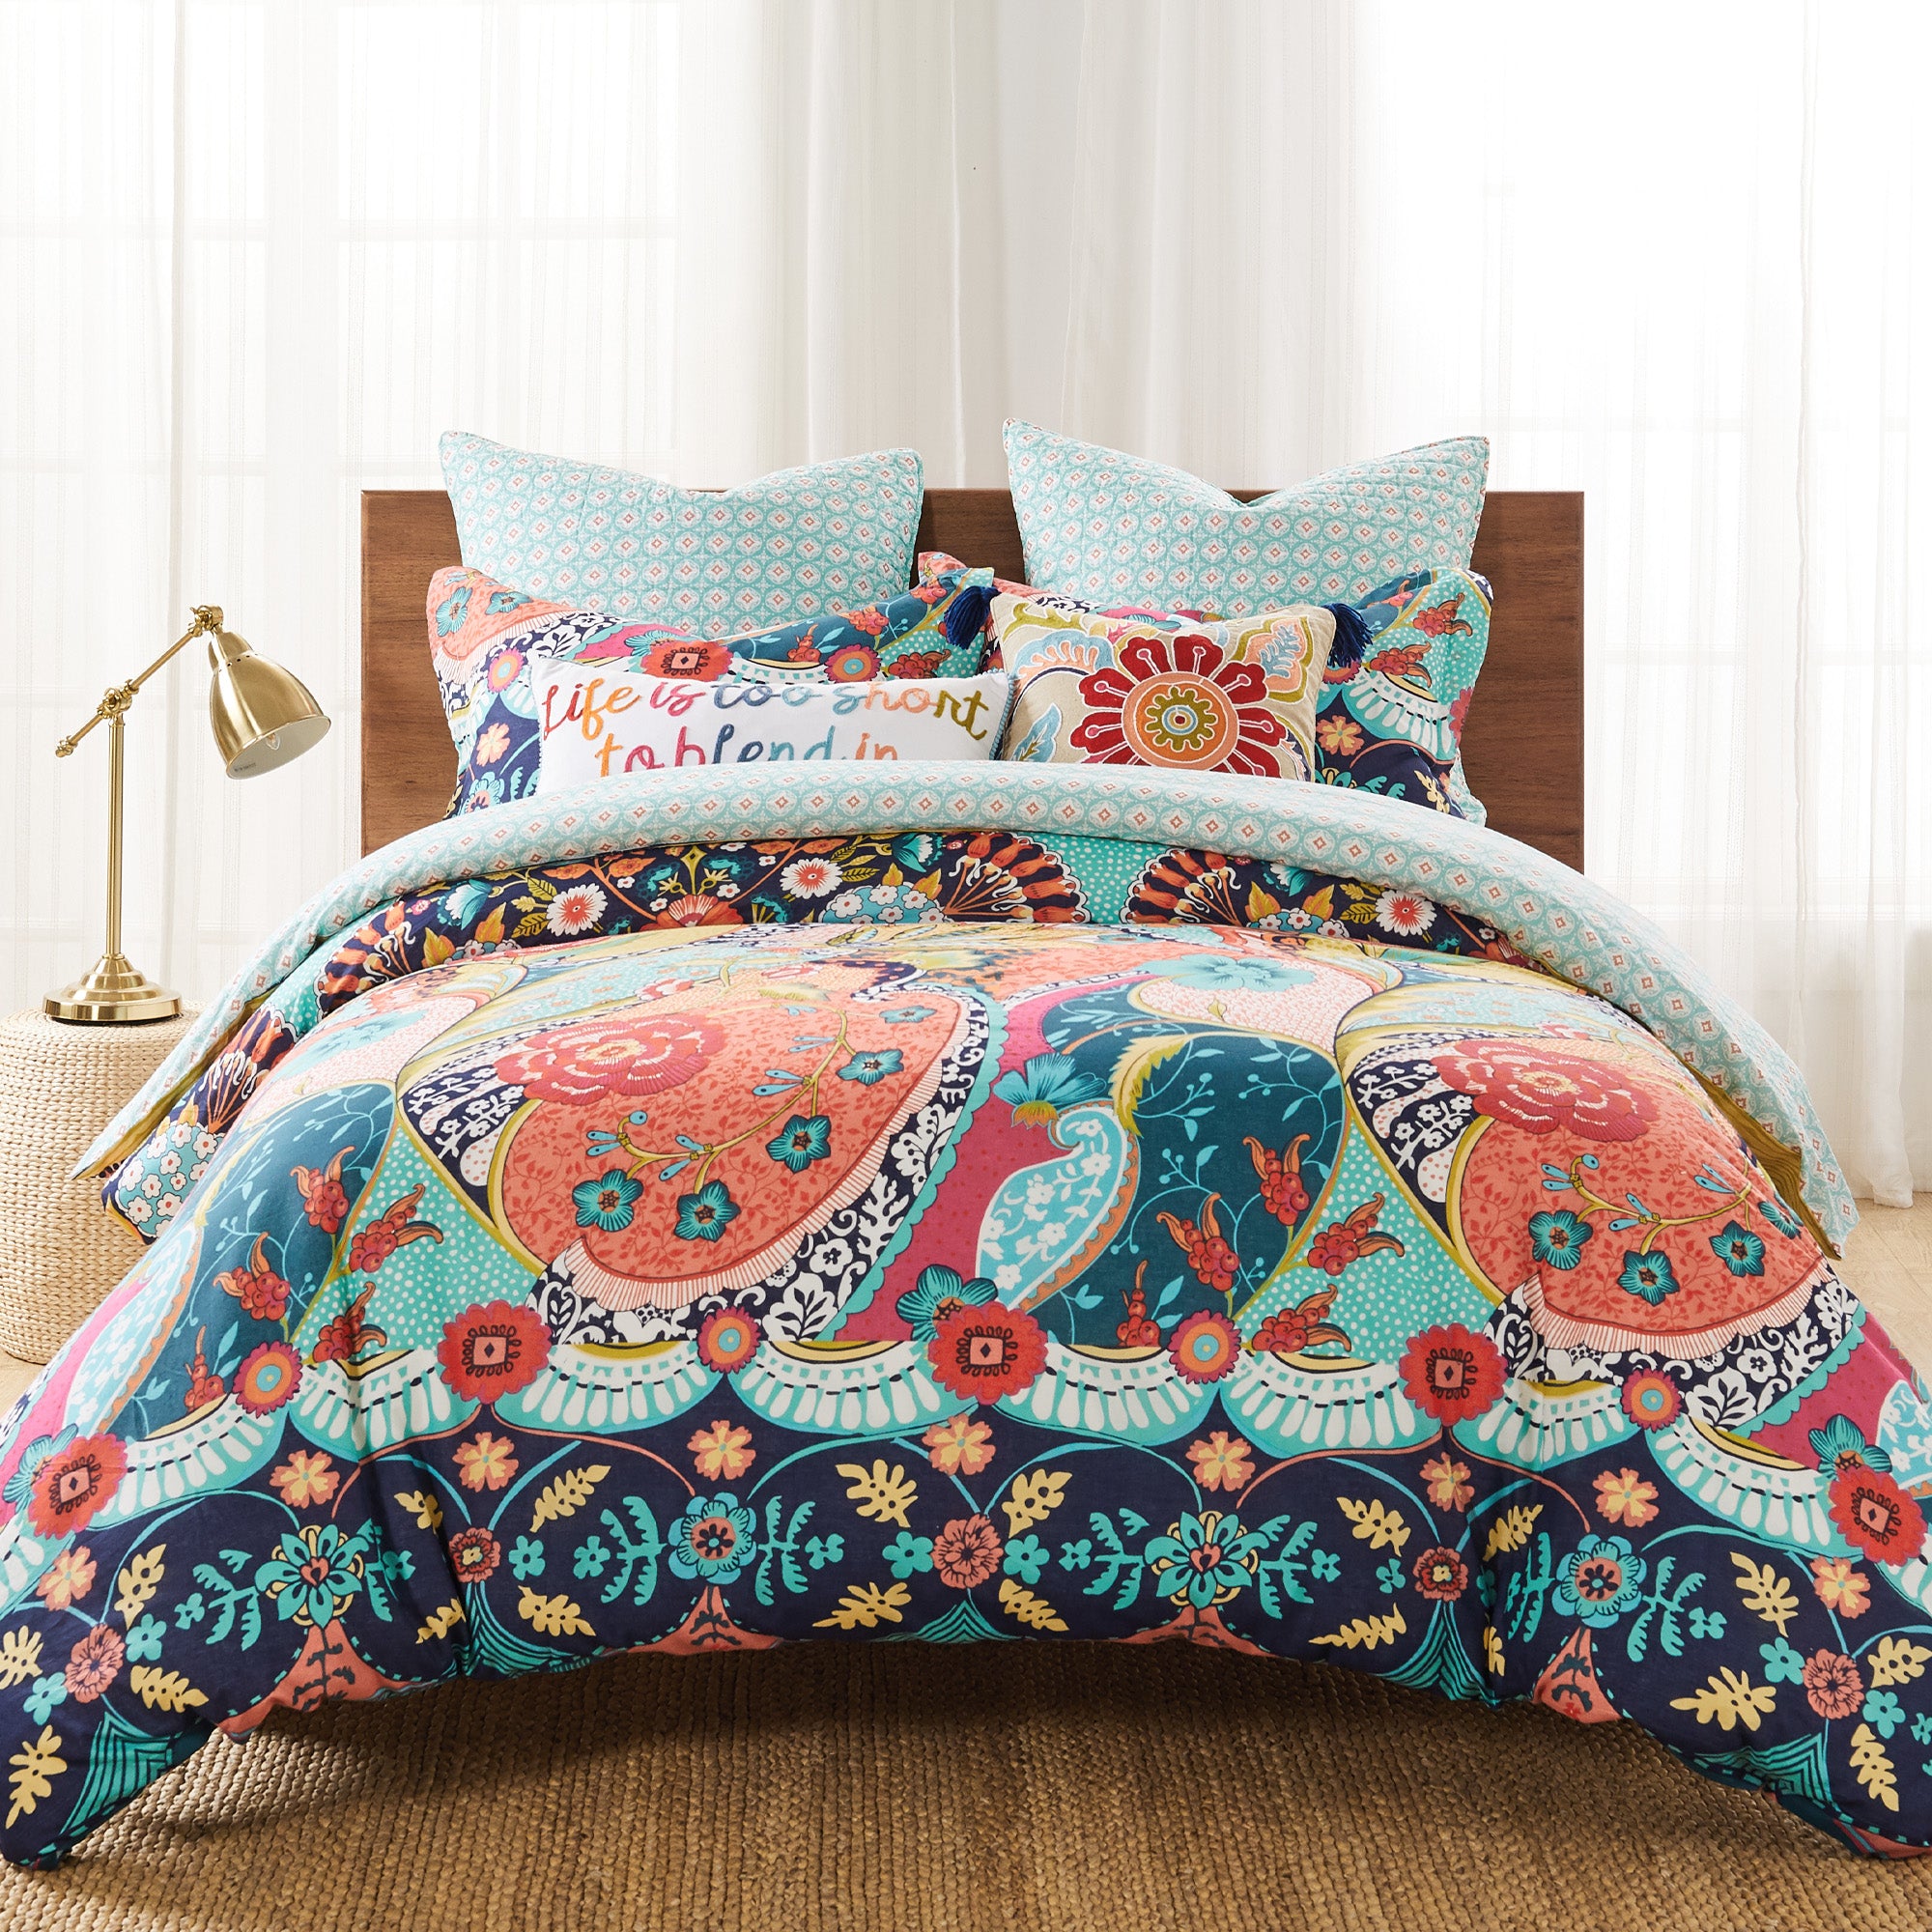  Levtex Home - Sophia Quilt Set - Full/Queen Quilt 88x92in. +  Two Standard Pillow Shams 26x20in. - Floral - Orange, Yellow, Red, Green,  Teal, and White - Reversible - Cotton Fabric : Home & Kitchen